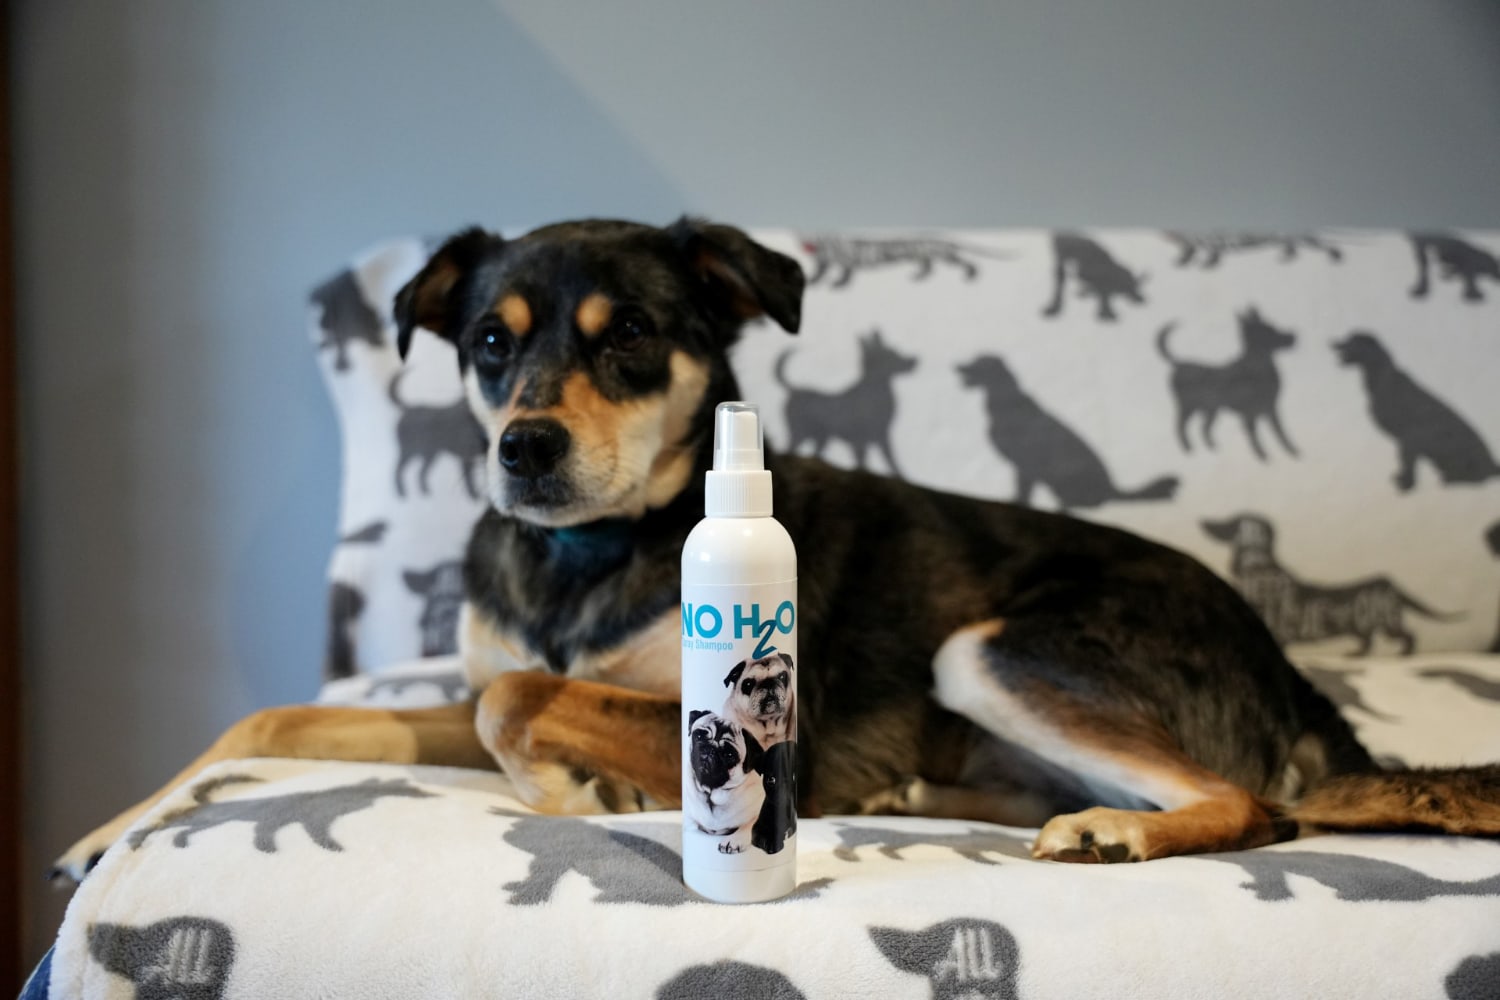 The Blissful Dog No H2O Spray Pet Shampoo - elo and the product